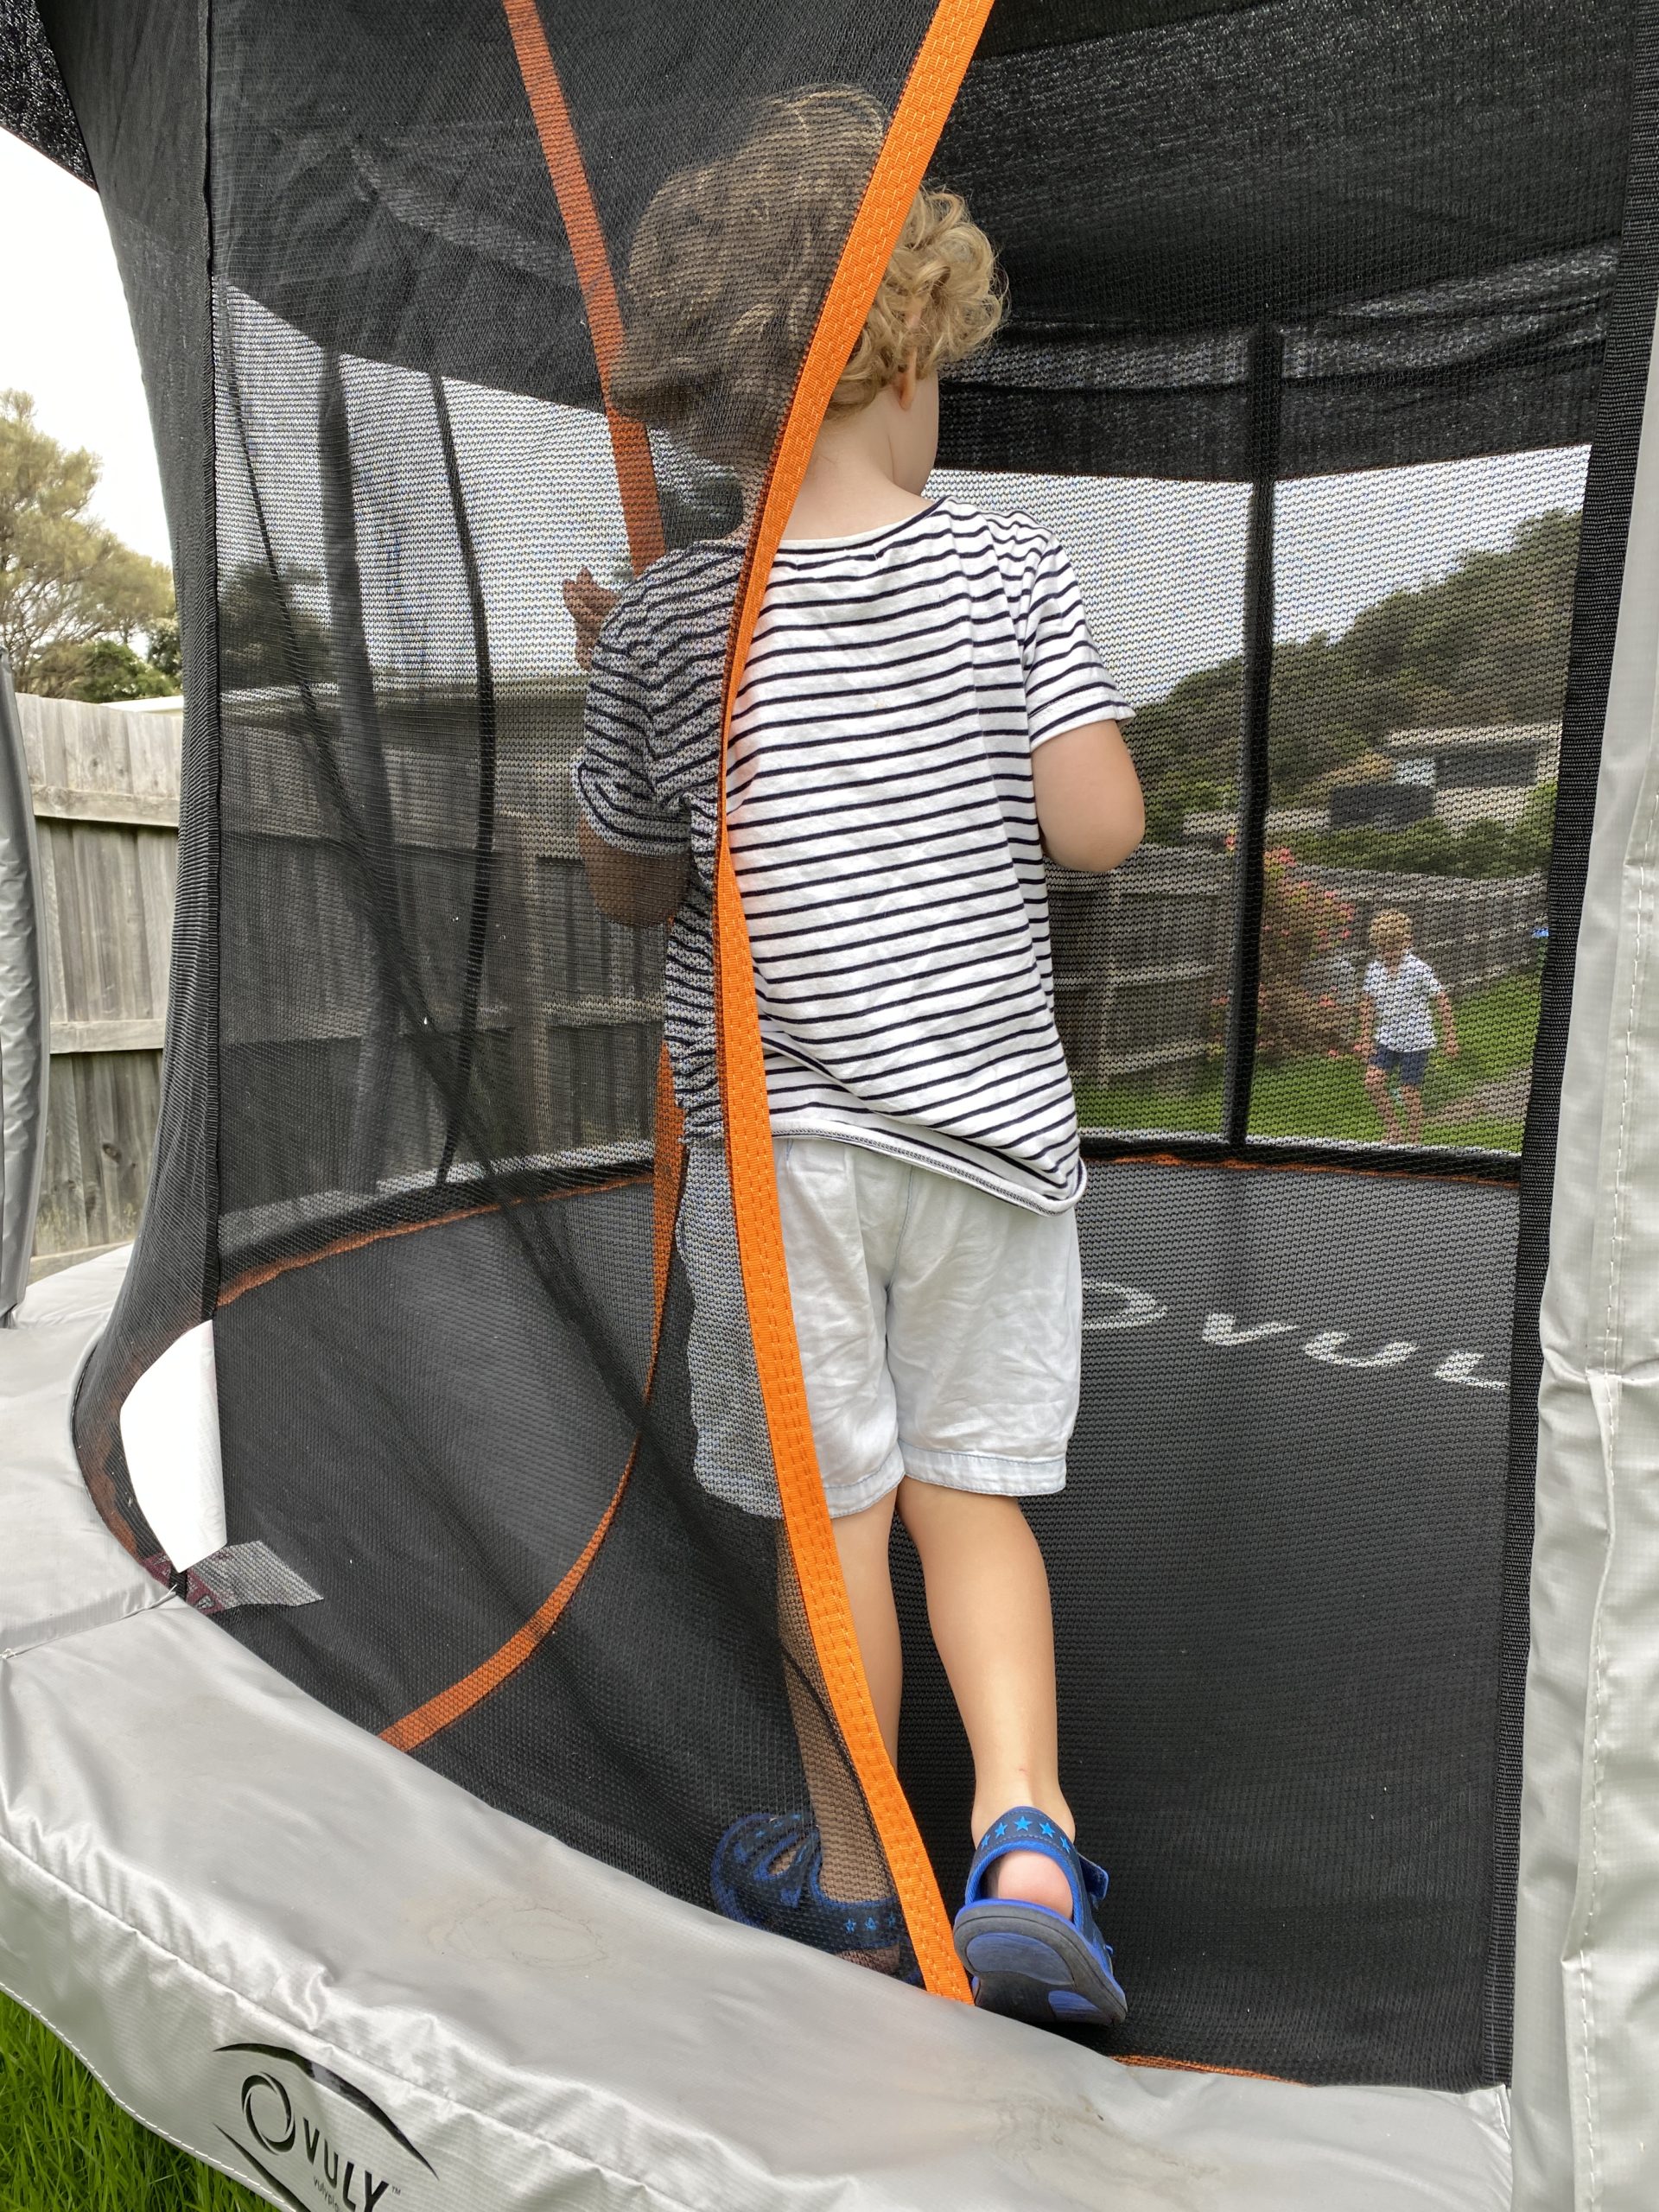 Vuly Trampoline review - Would Karl Do